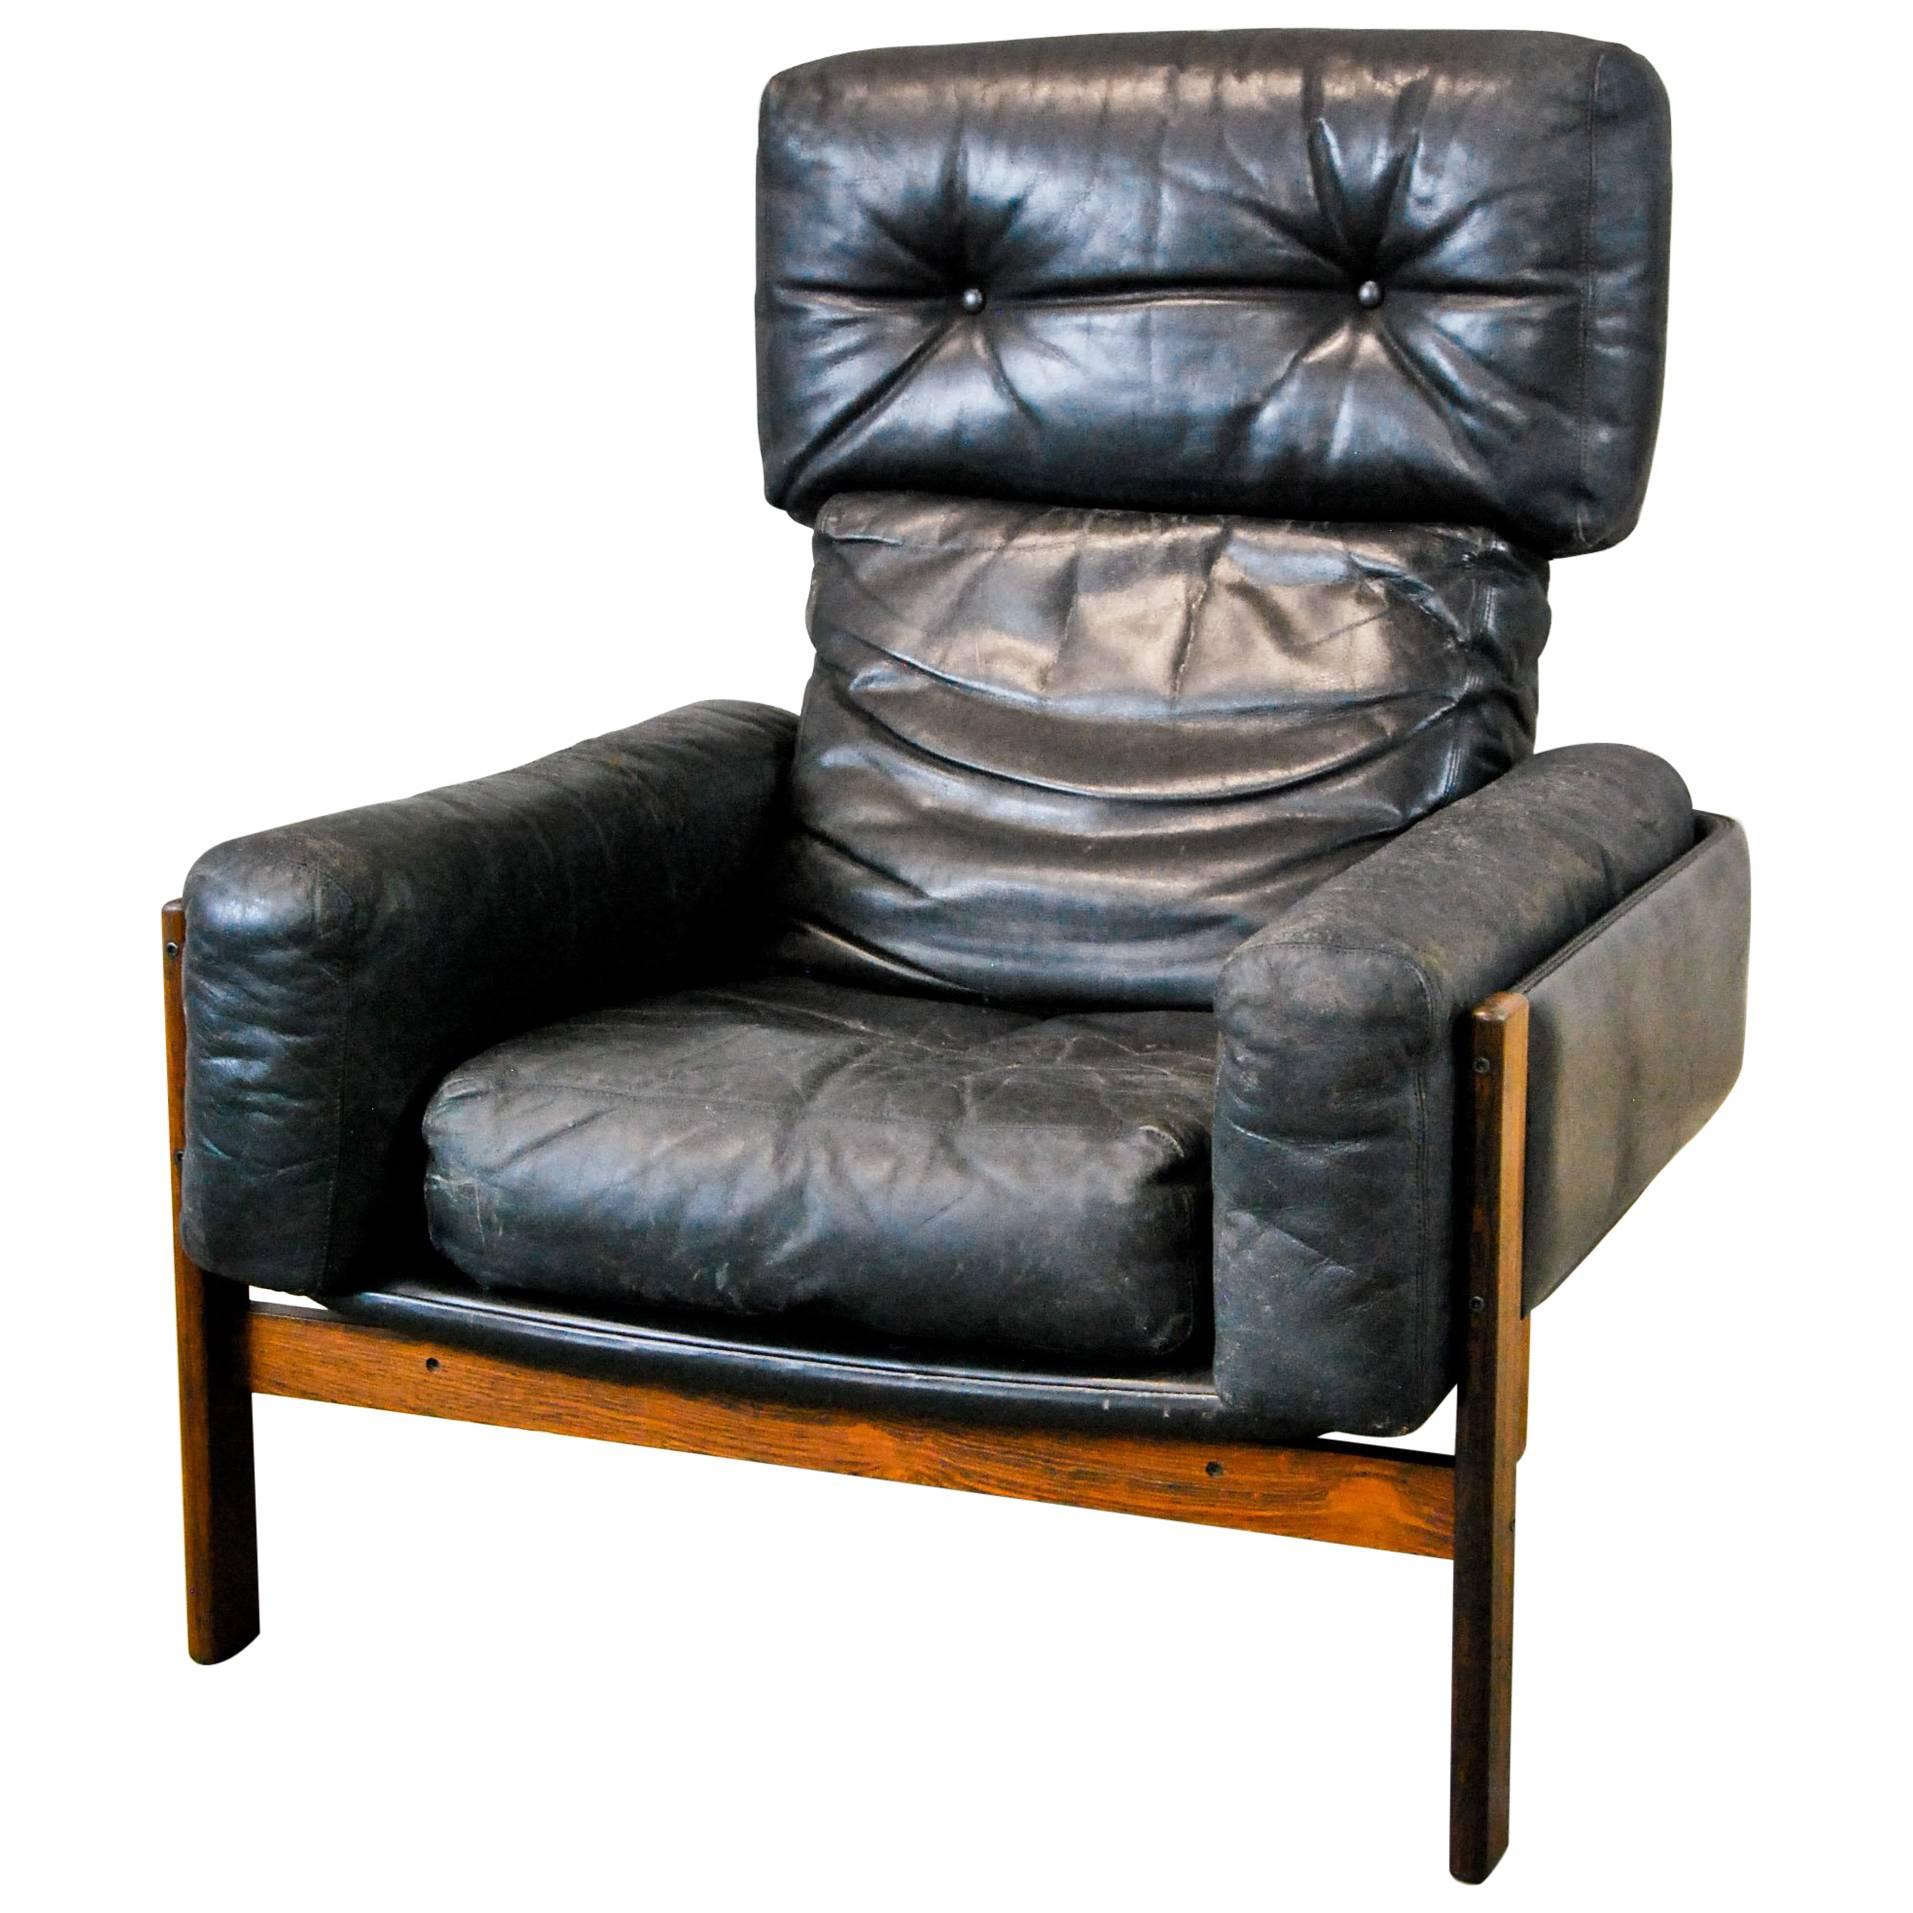 1960 Leather Rosewood Lounge Chair by Sven Ivar Dysthe for Dokka Mobler